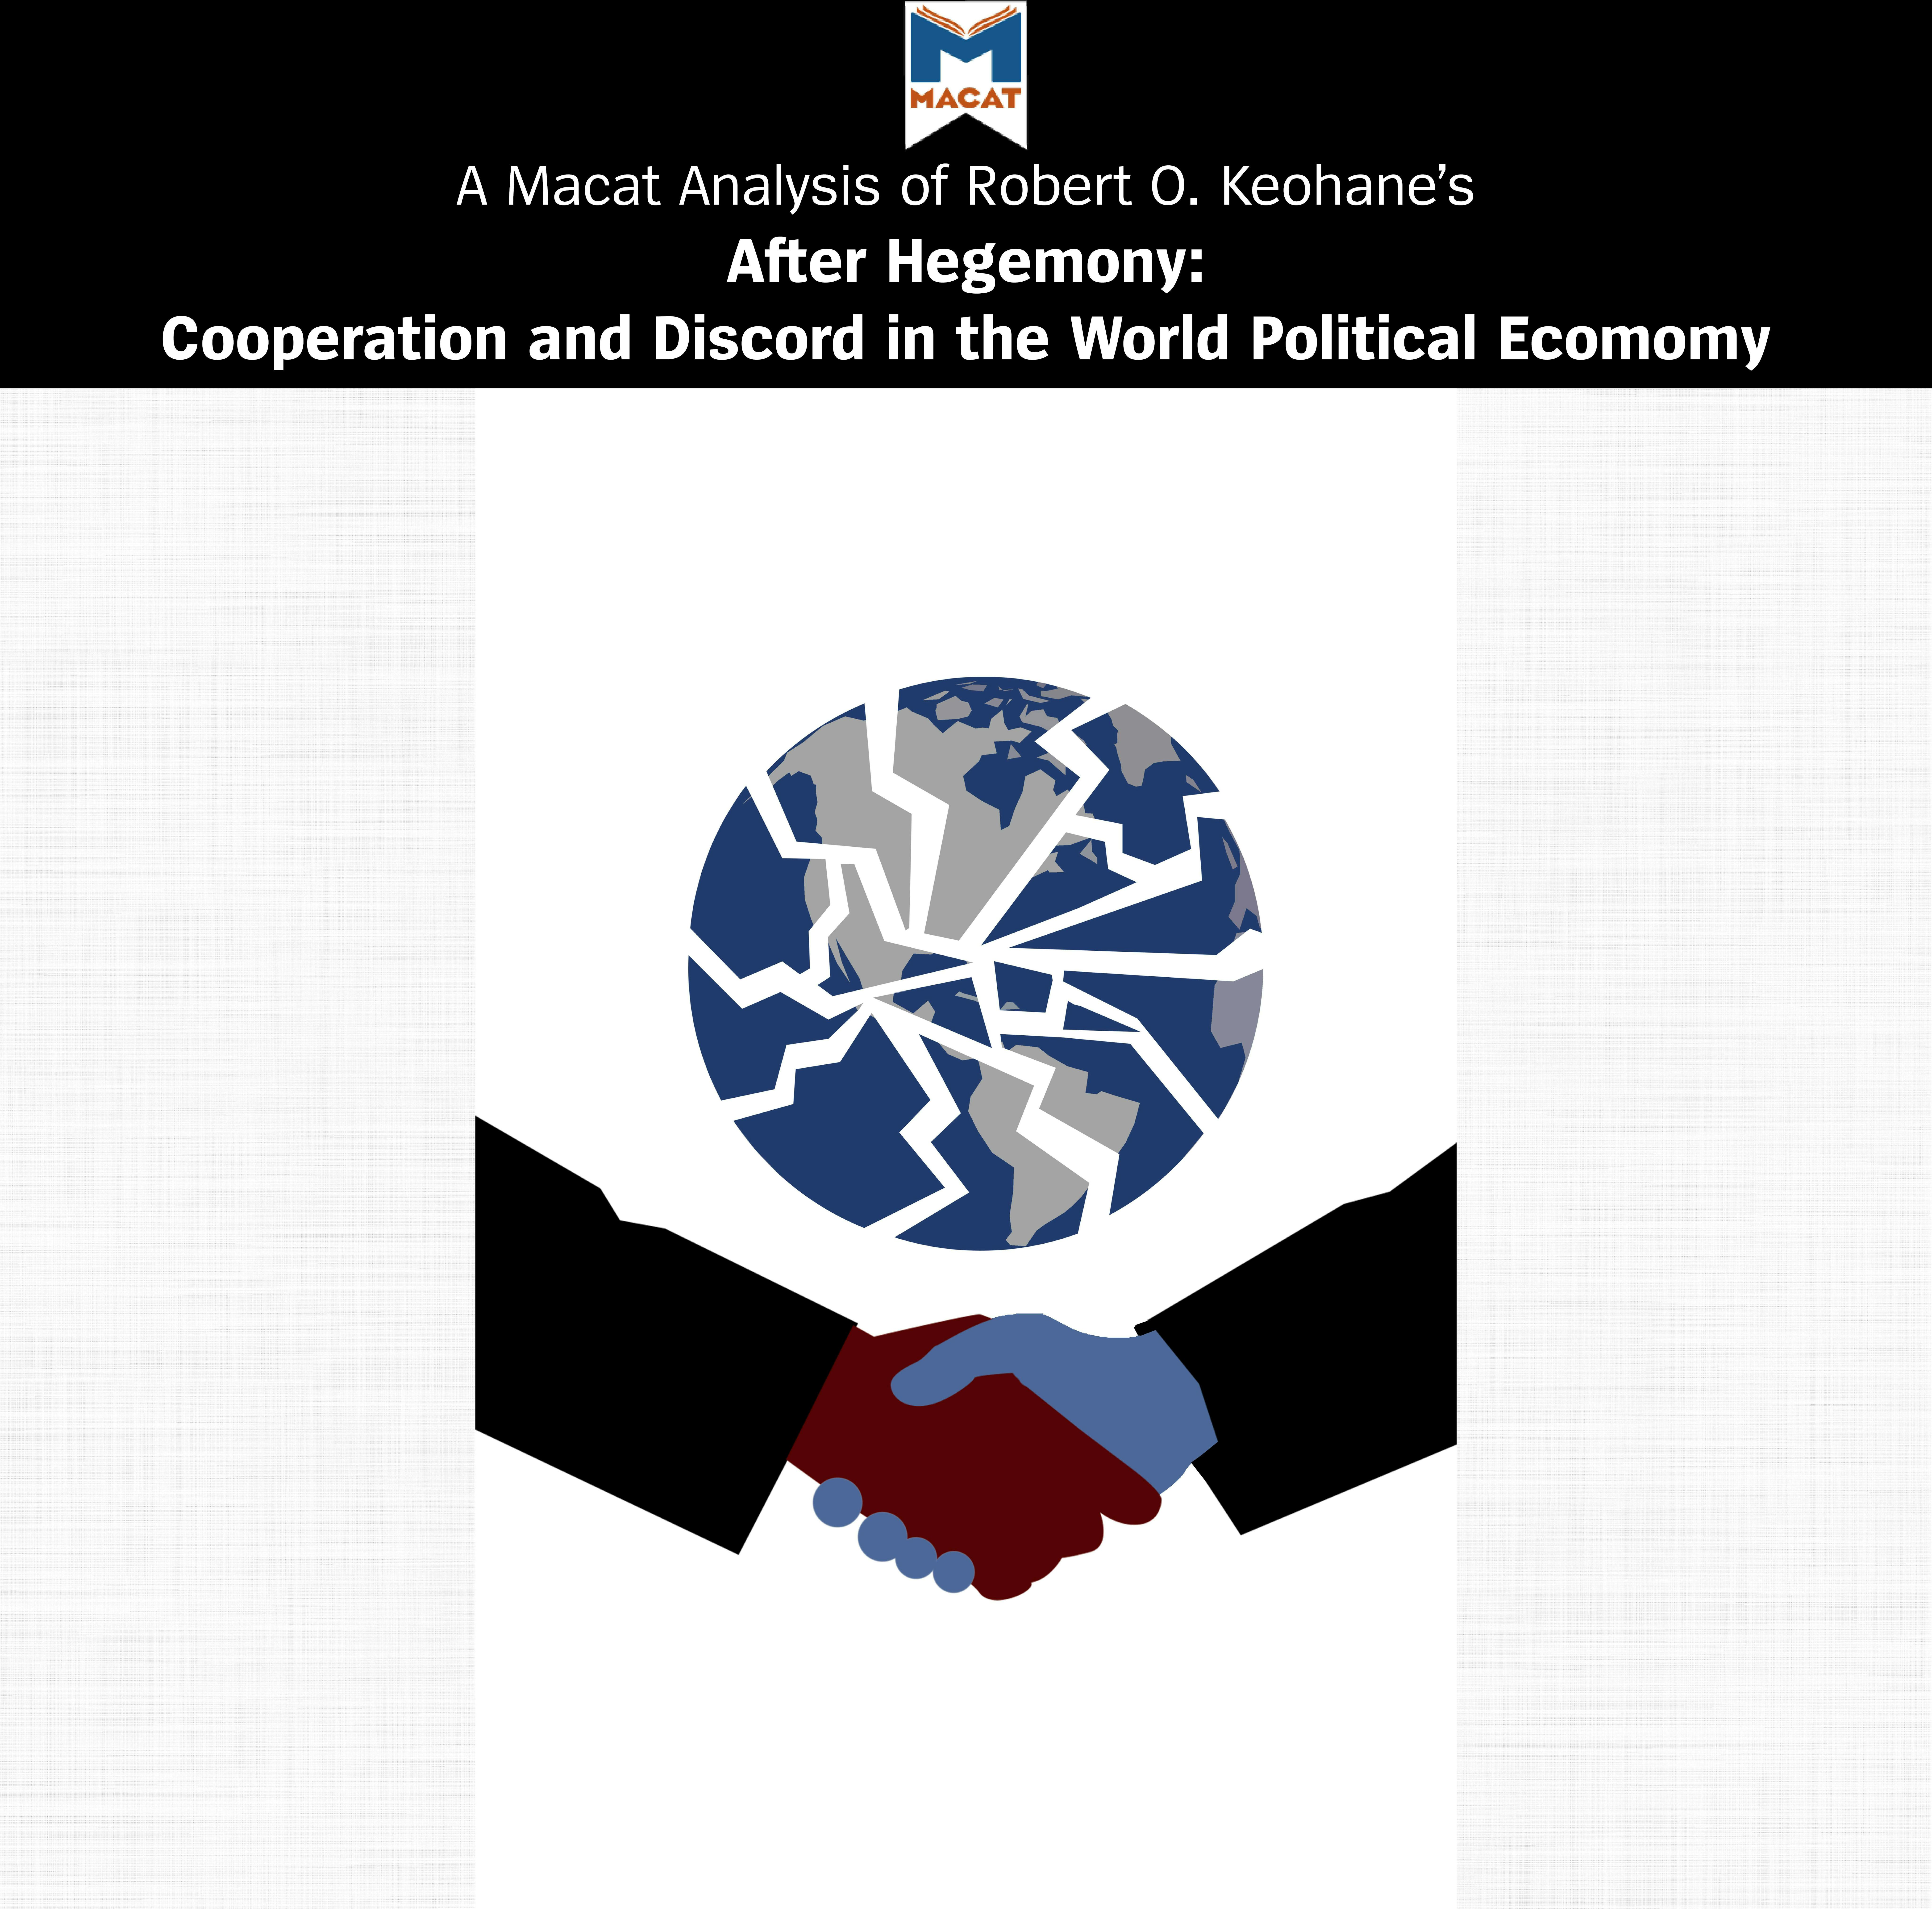 A Macat Analysis of Robert O. Keohane's After Hegemony: Cooperation and Discord in the World Political Economy - Ramon Pacheco Pardo